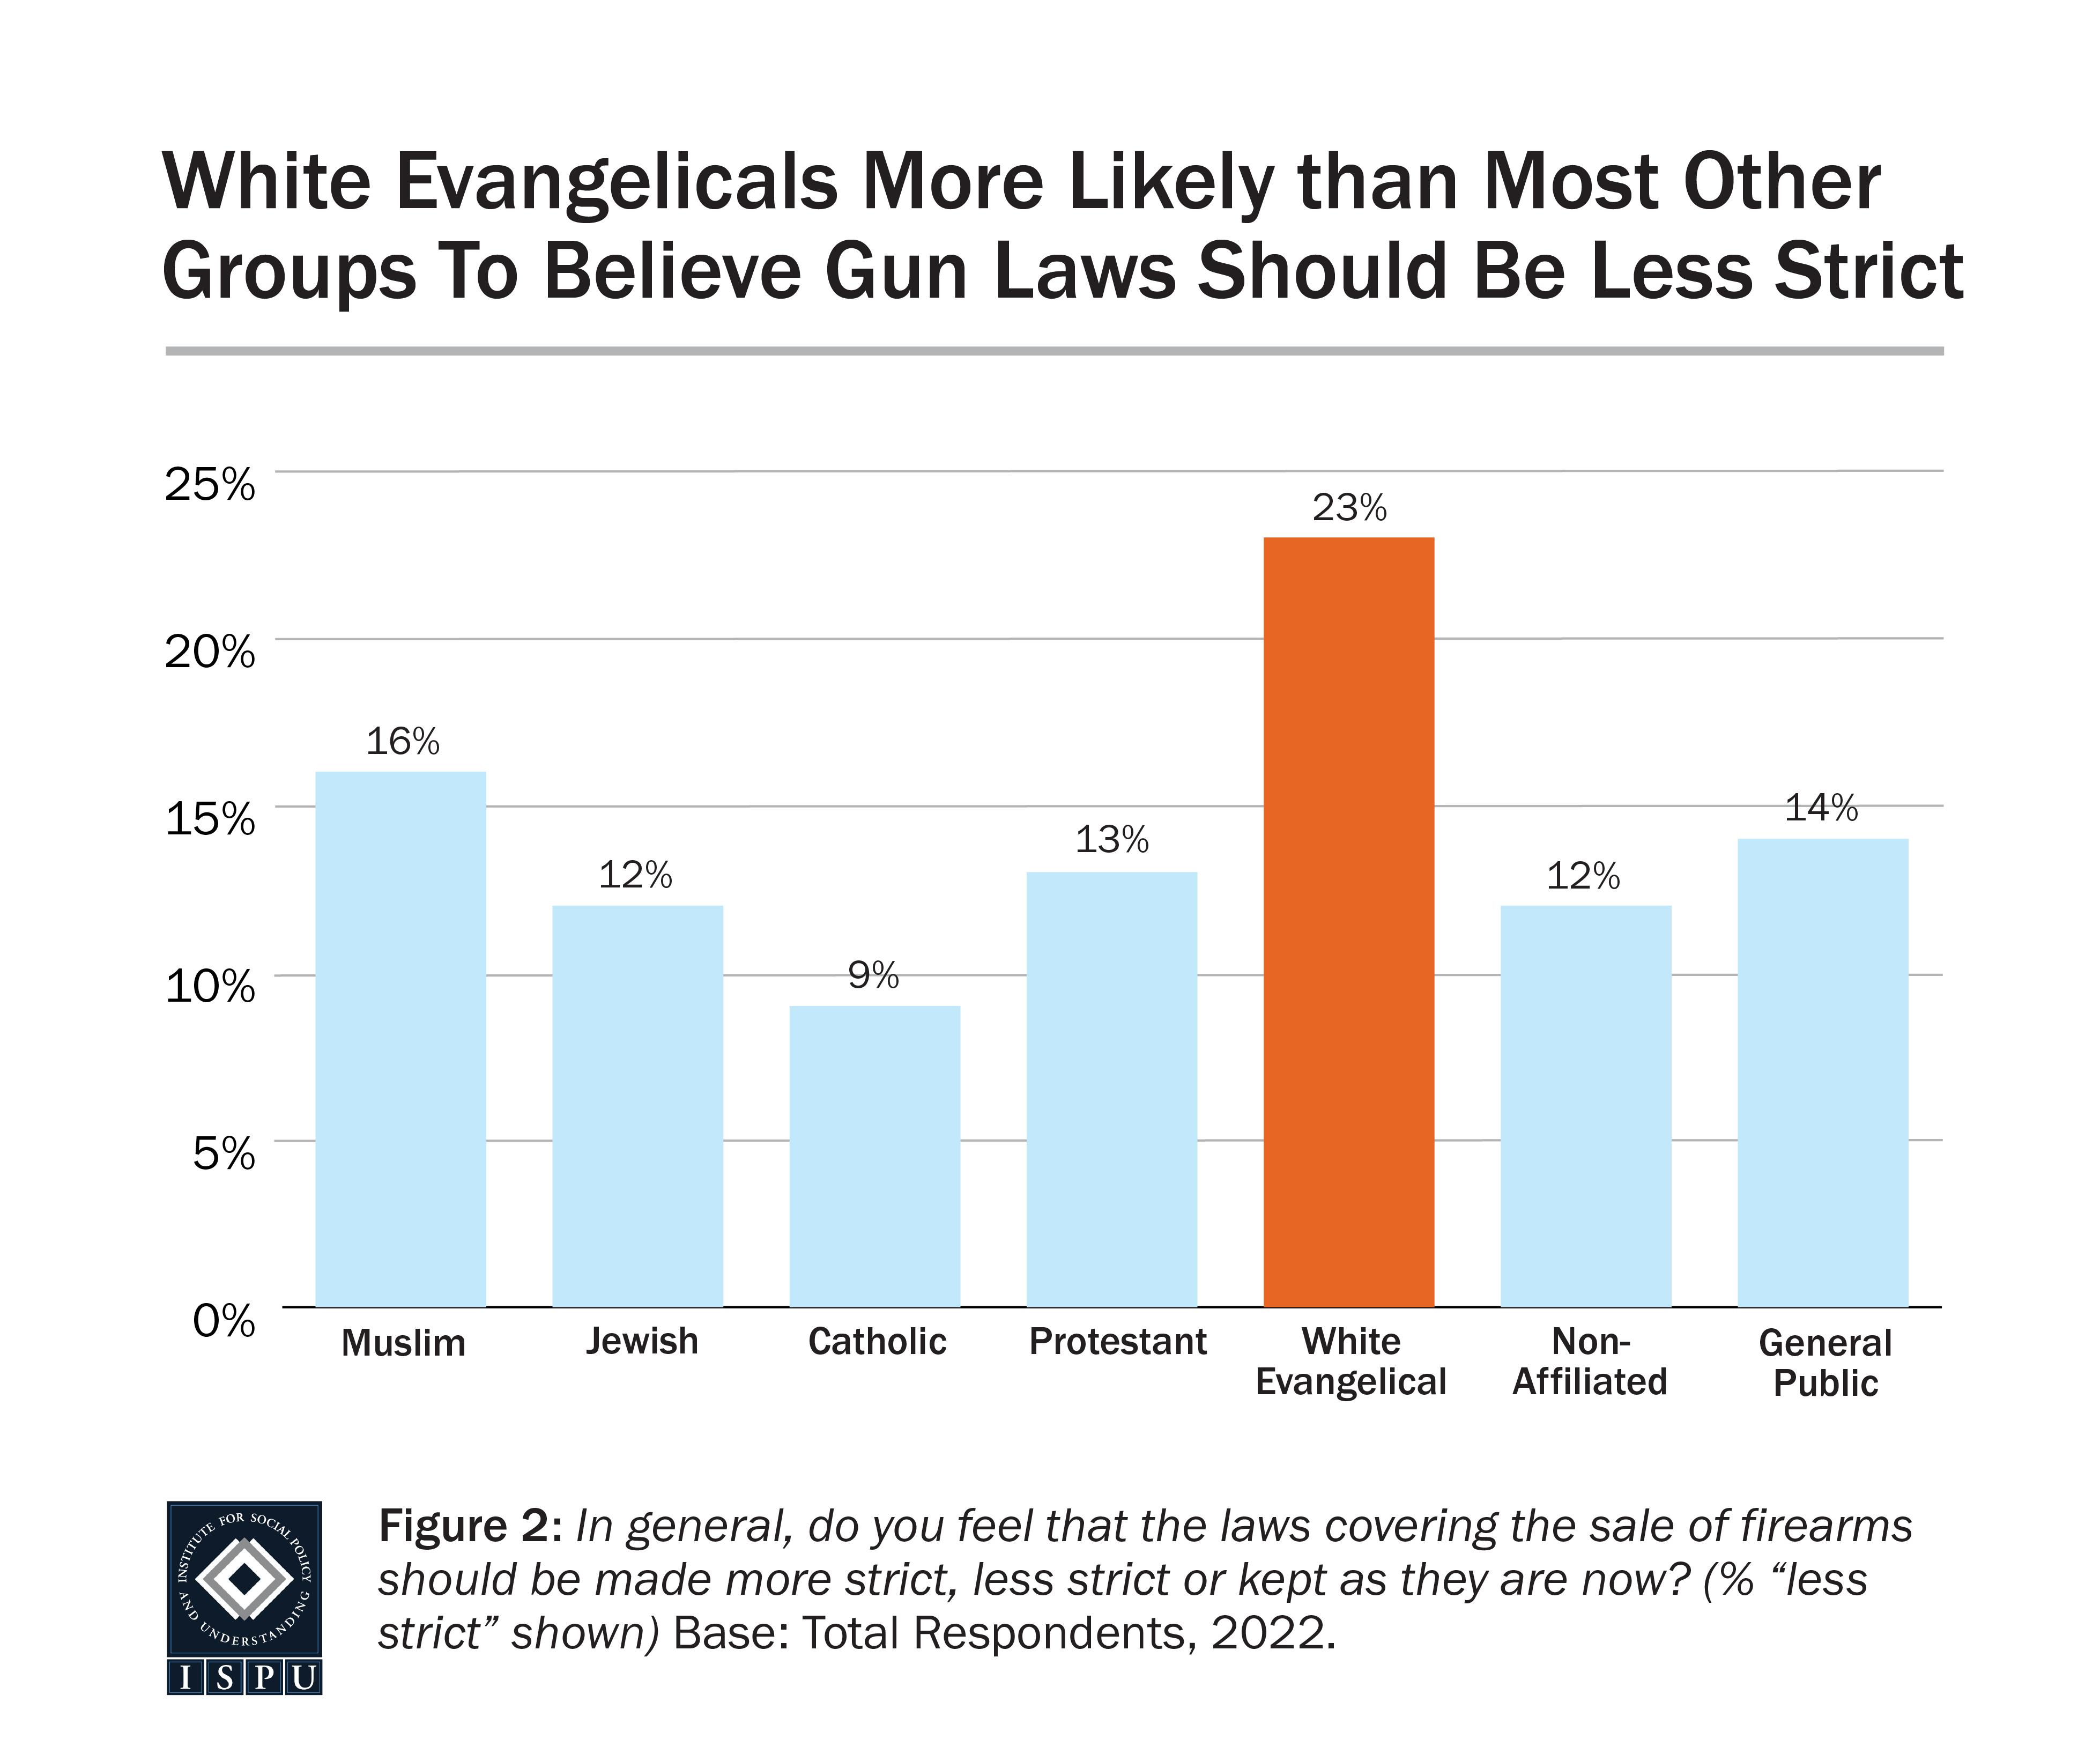 Graph displaying: At 23%, White Evangelicals are most likely to believe gun laws should be less strict